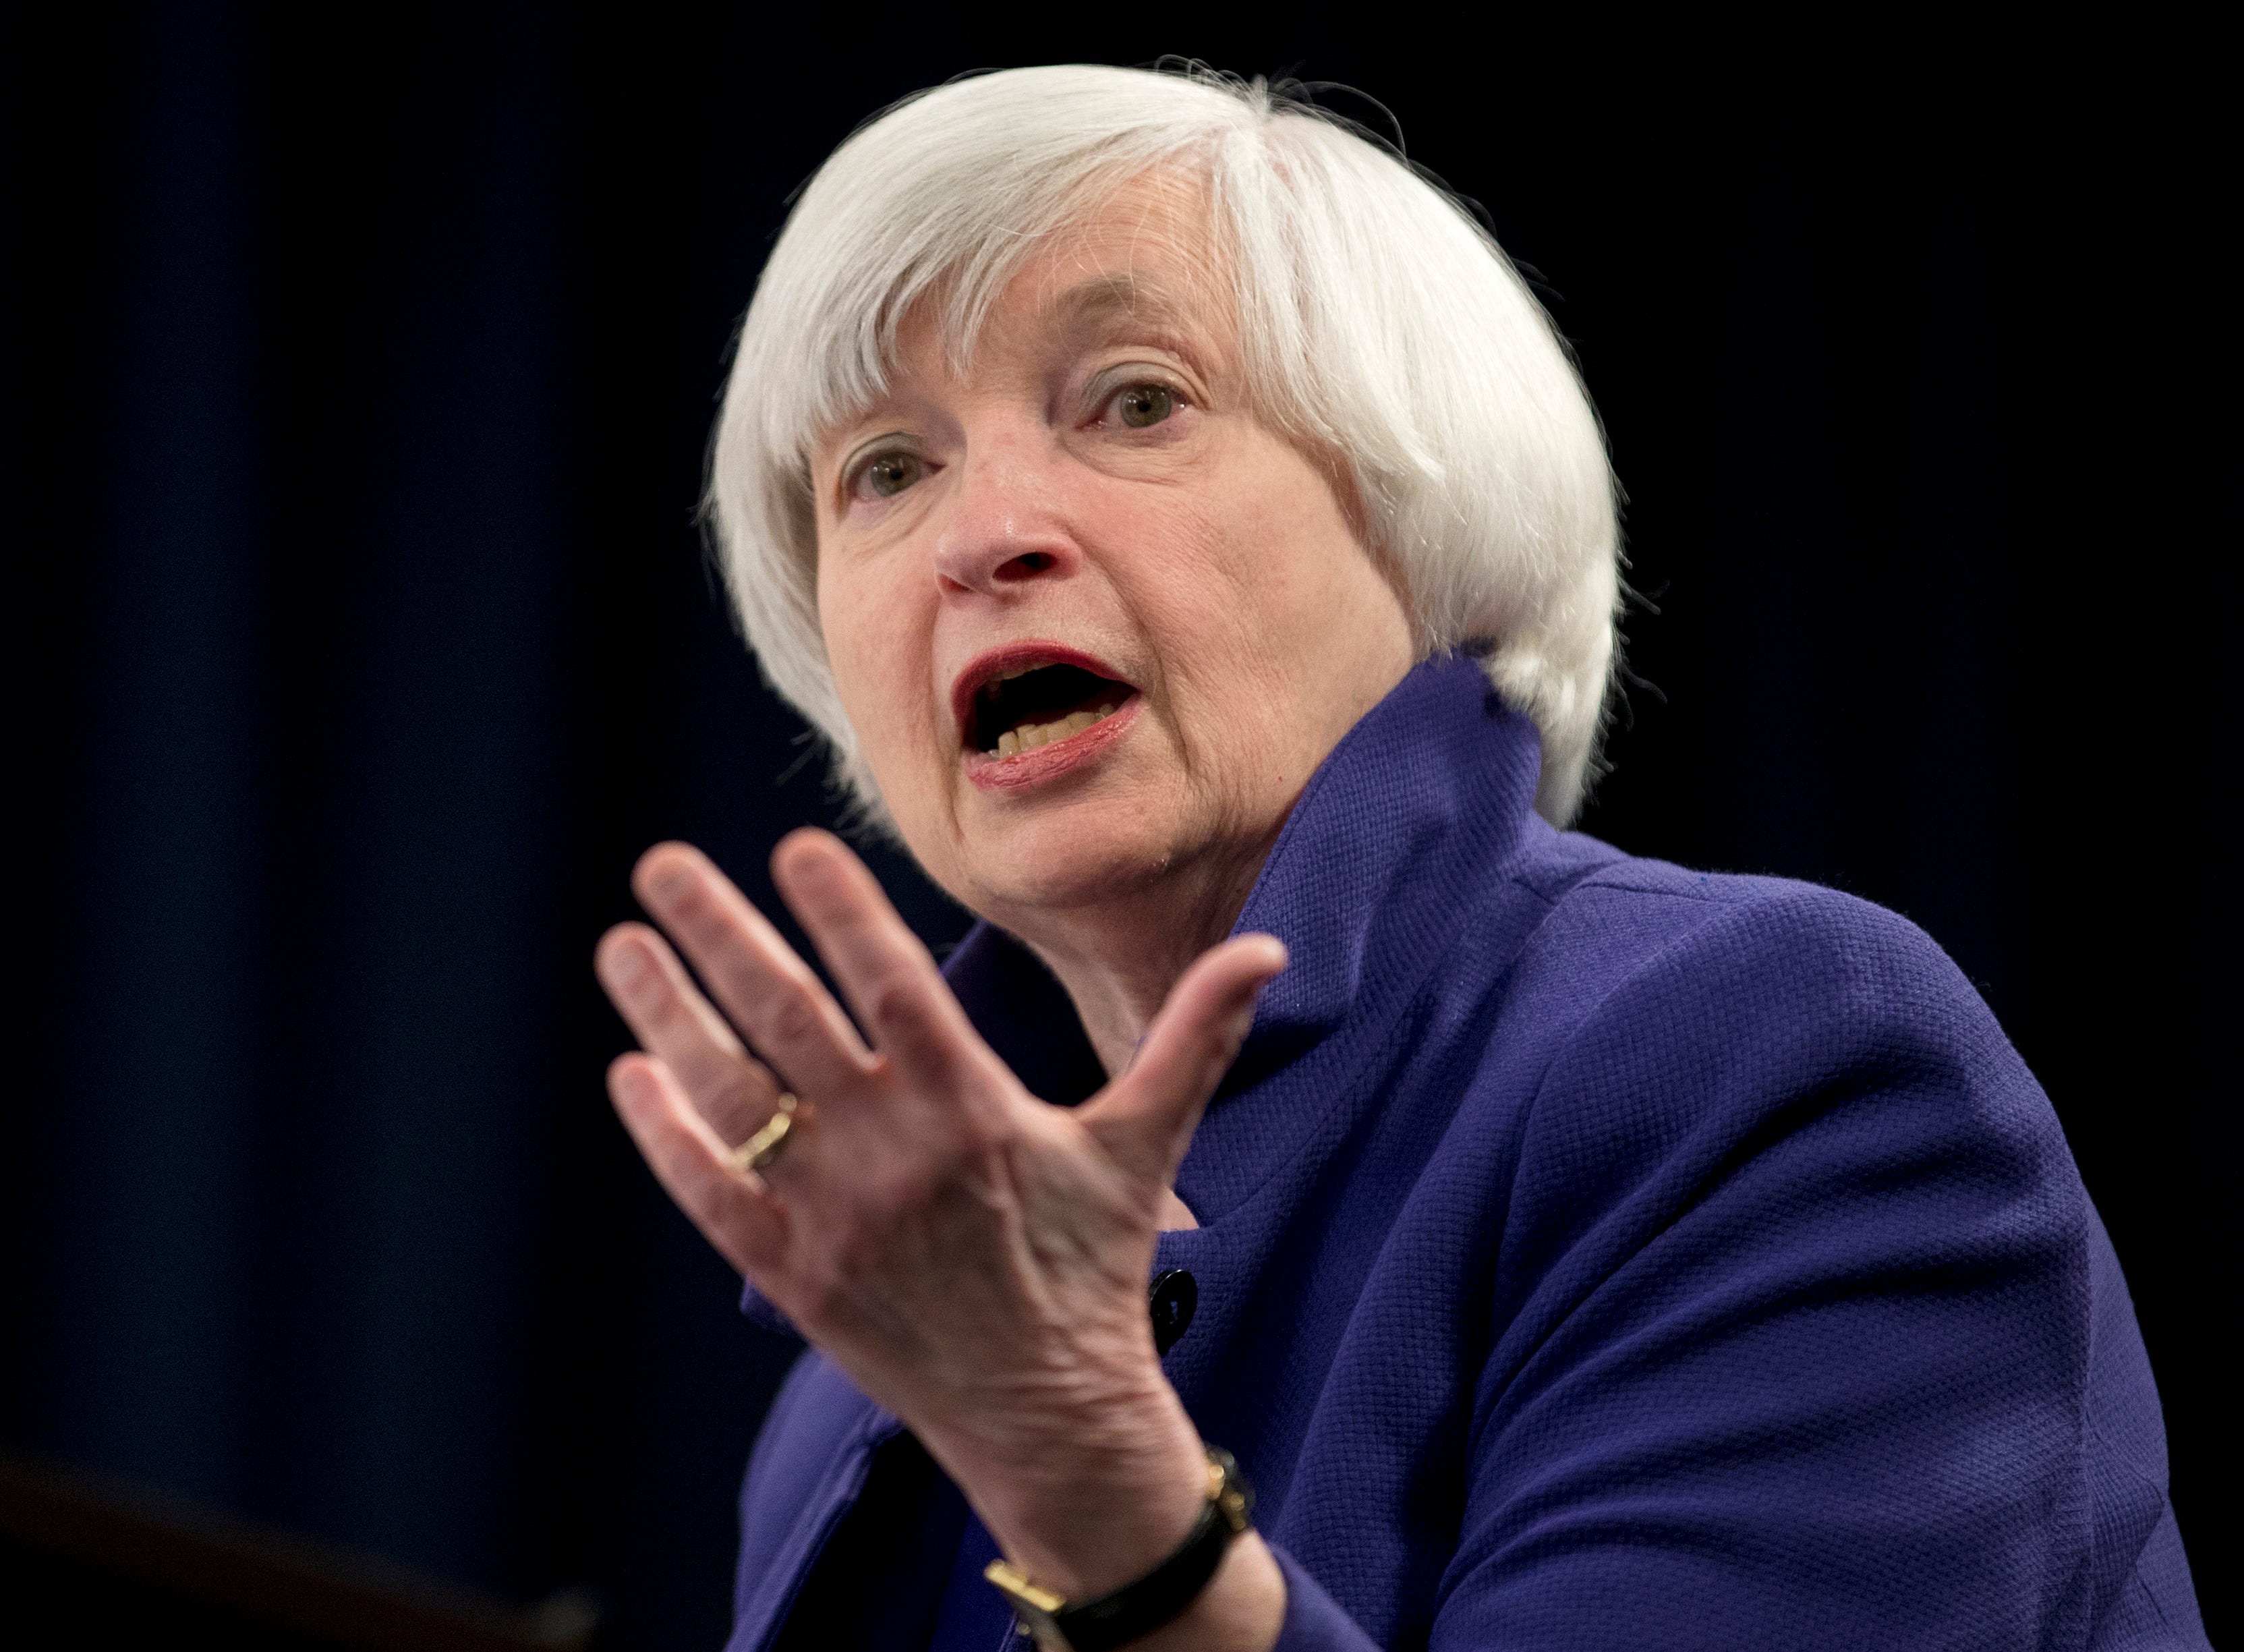 Treasury Secretary Janet Yellen said earlier this month that the US will experience higher inflation rates through 2021.